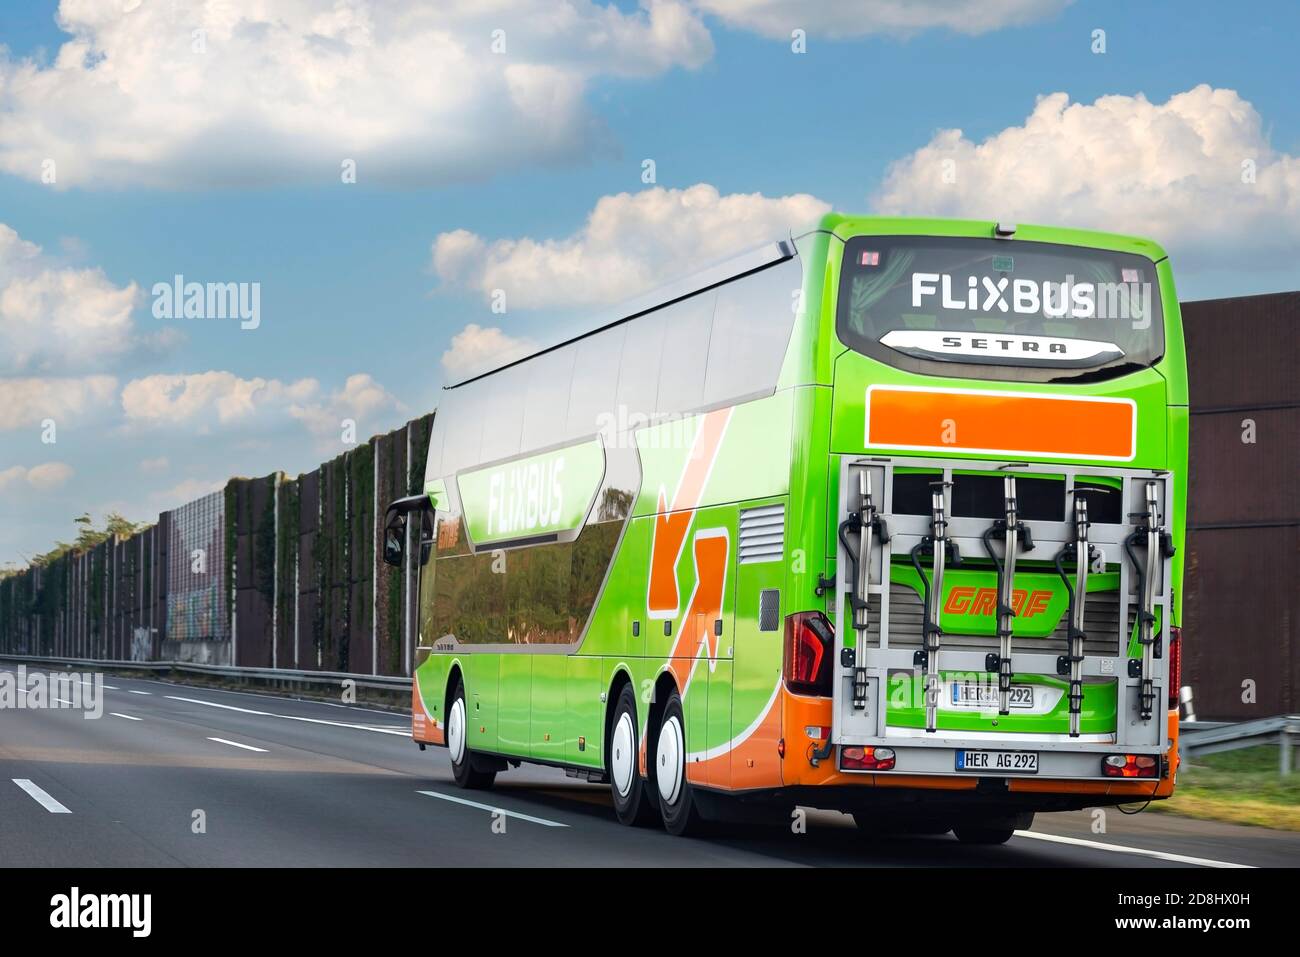 Flixbus Logo High Resolution Stock Photography and Images - Alamy